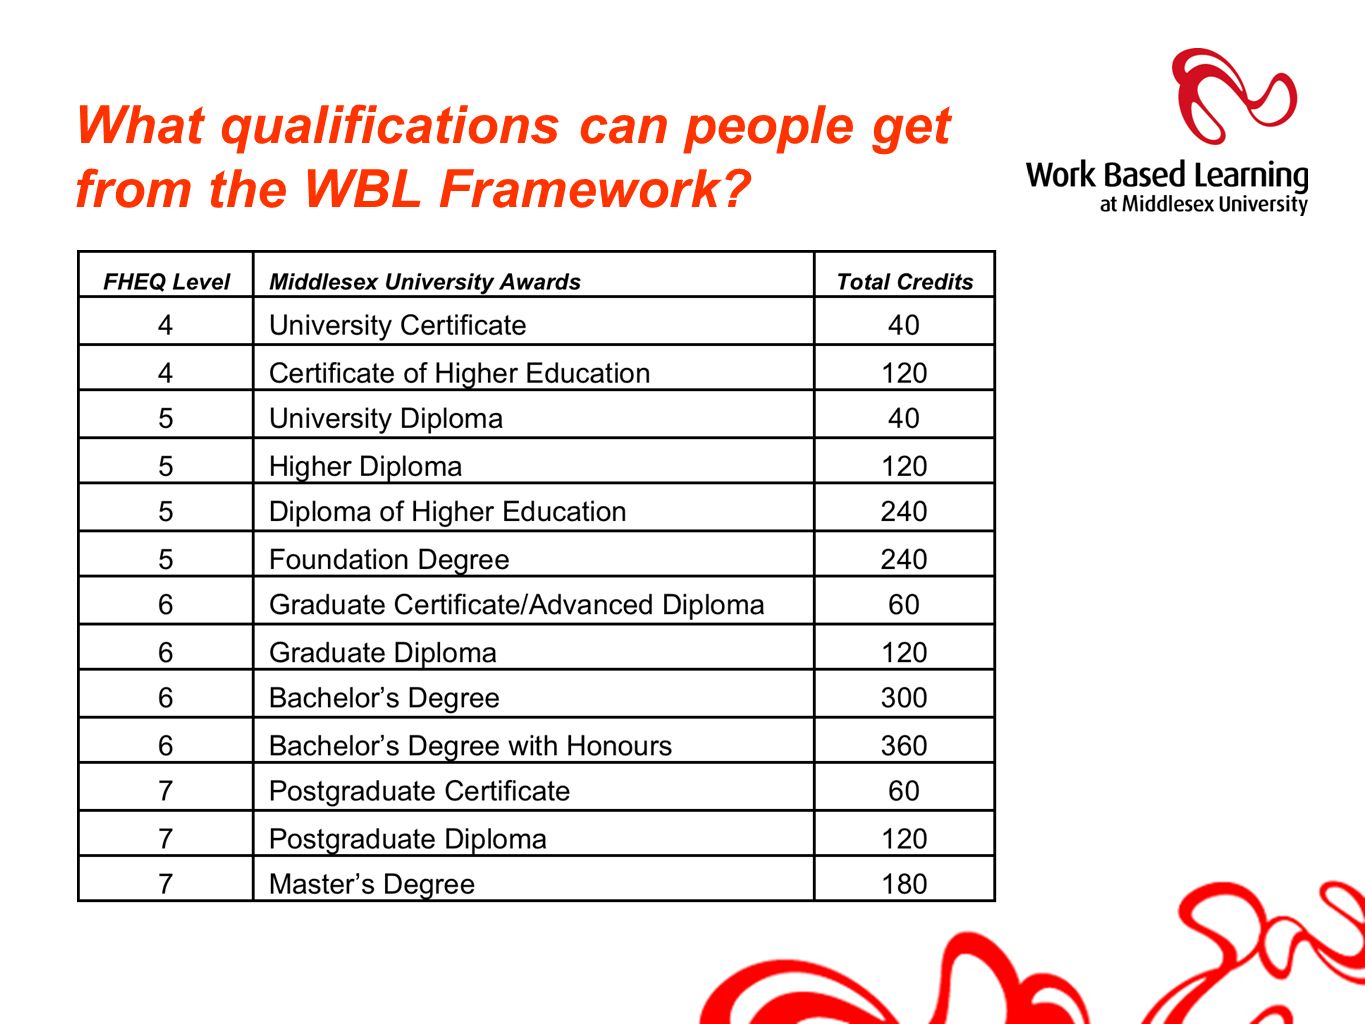 What qualifications can people get from the WBL Framework